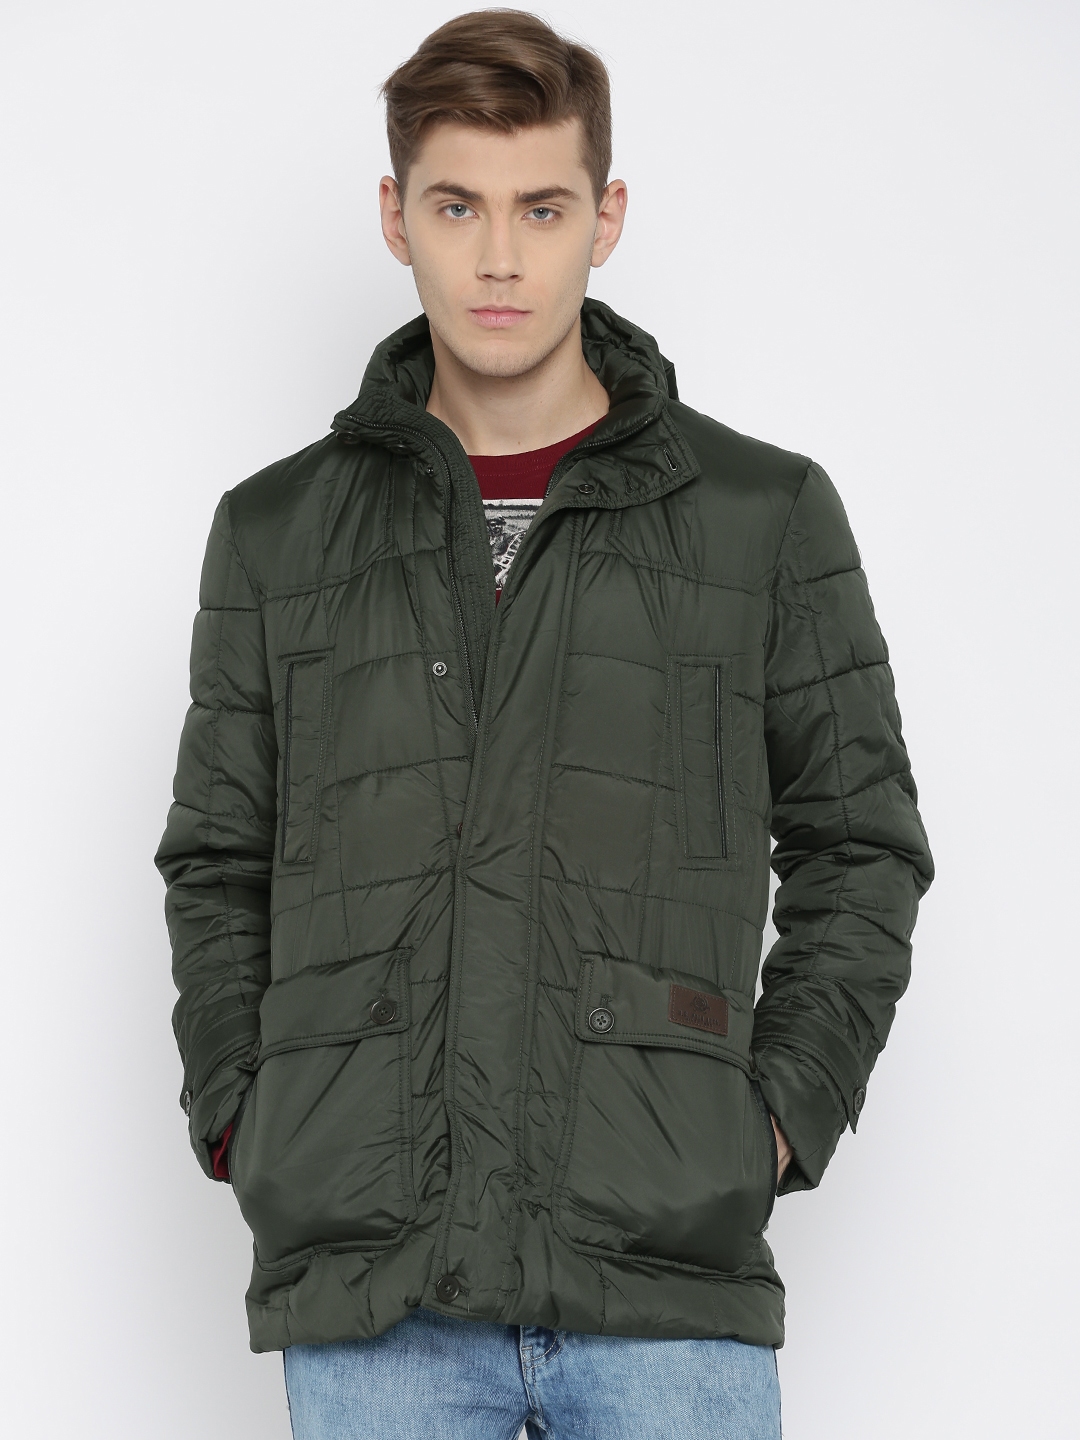 Buy U.S. Polo Assn. Olive Green Padded Jacket - Jackets for Men 998304 ...